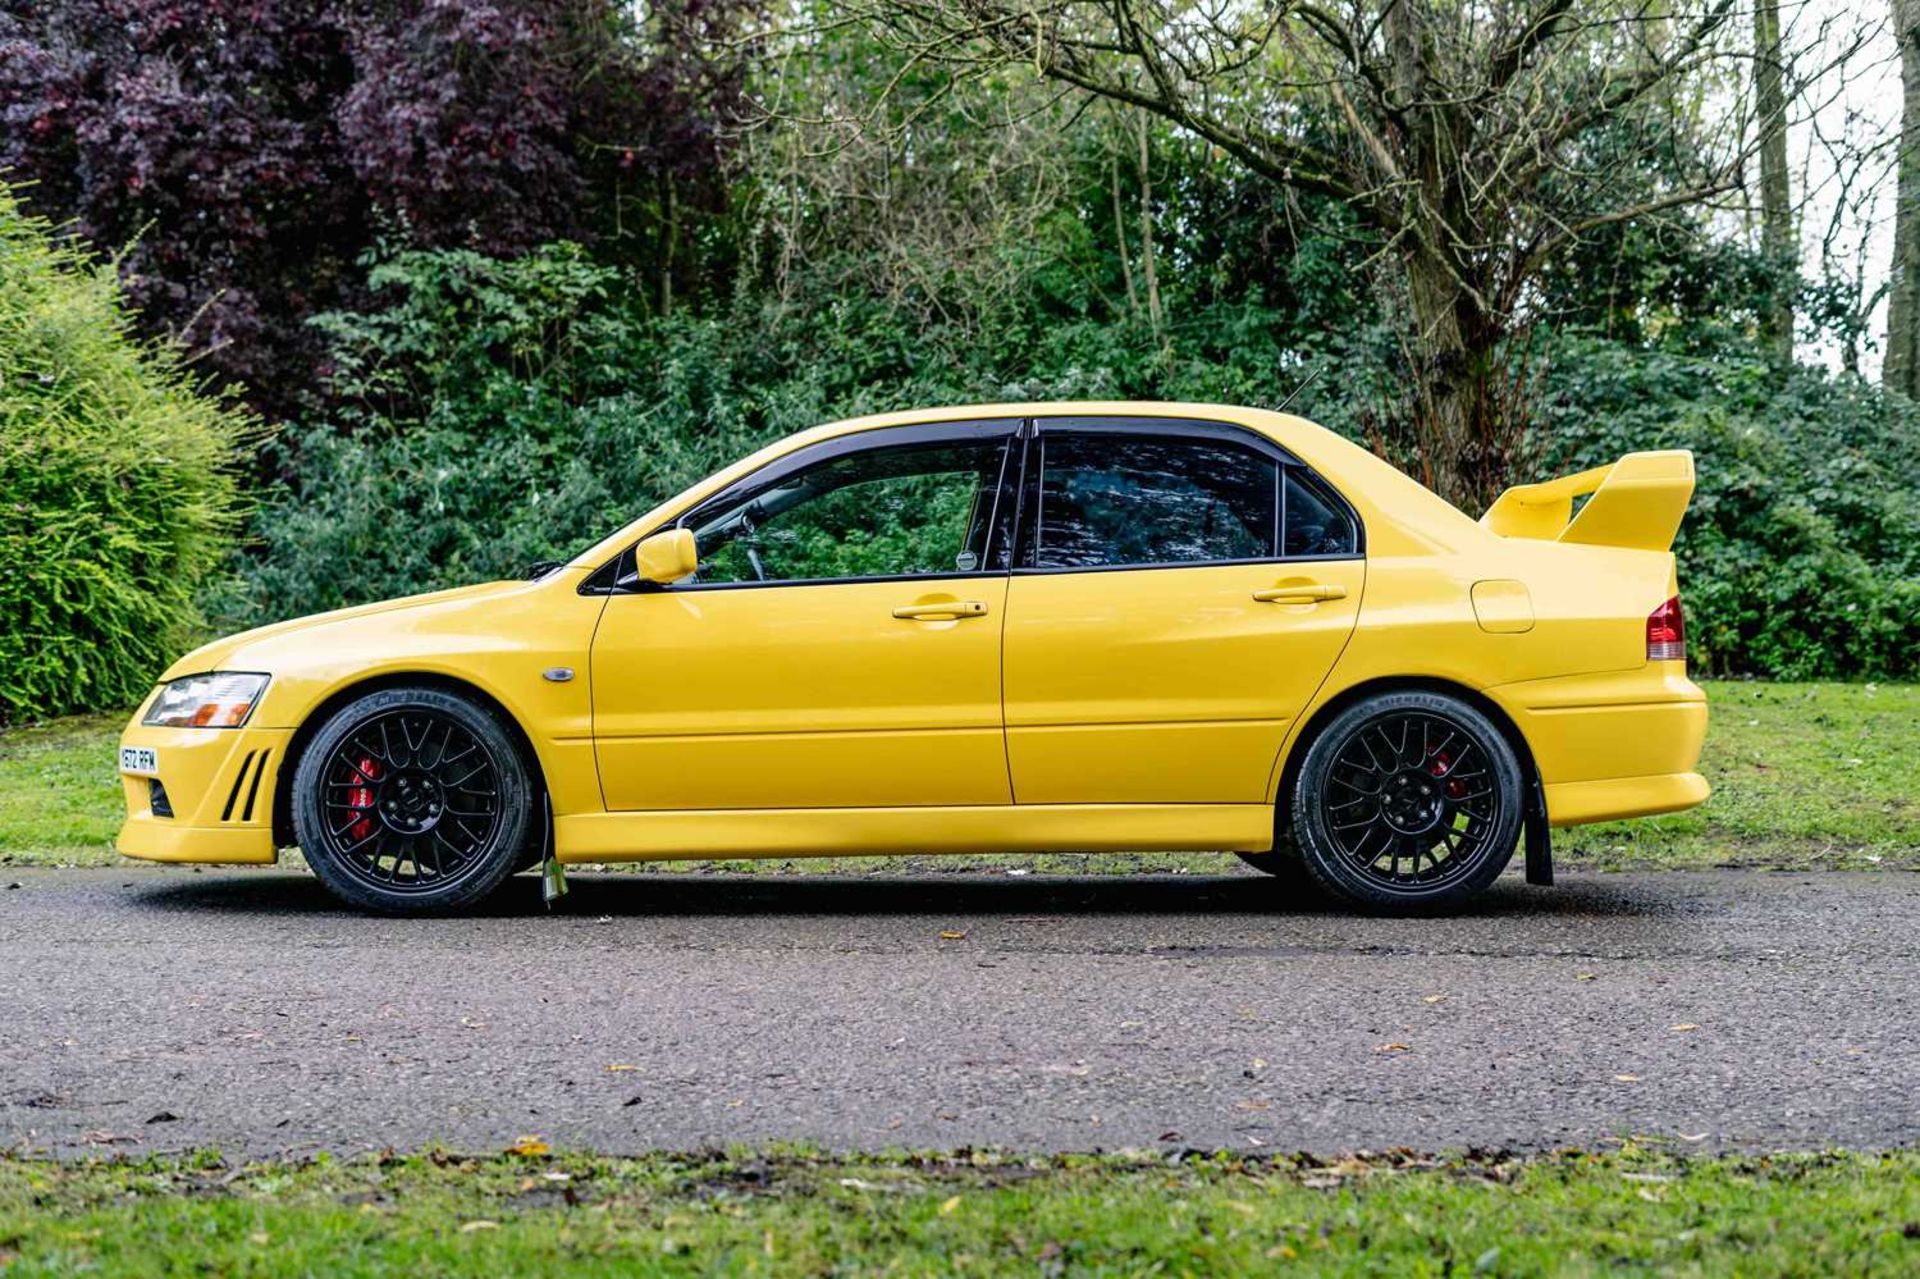 2001 Mitsubishi Lancer Evolution VII Subtly upgraded and previous long-term (seventeen year) ownersh - Image 7 of 64